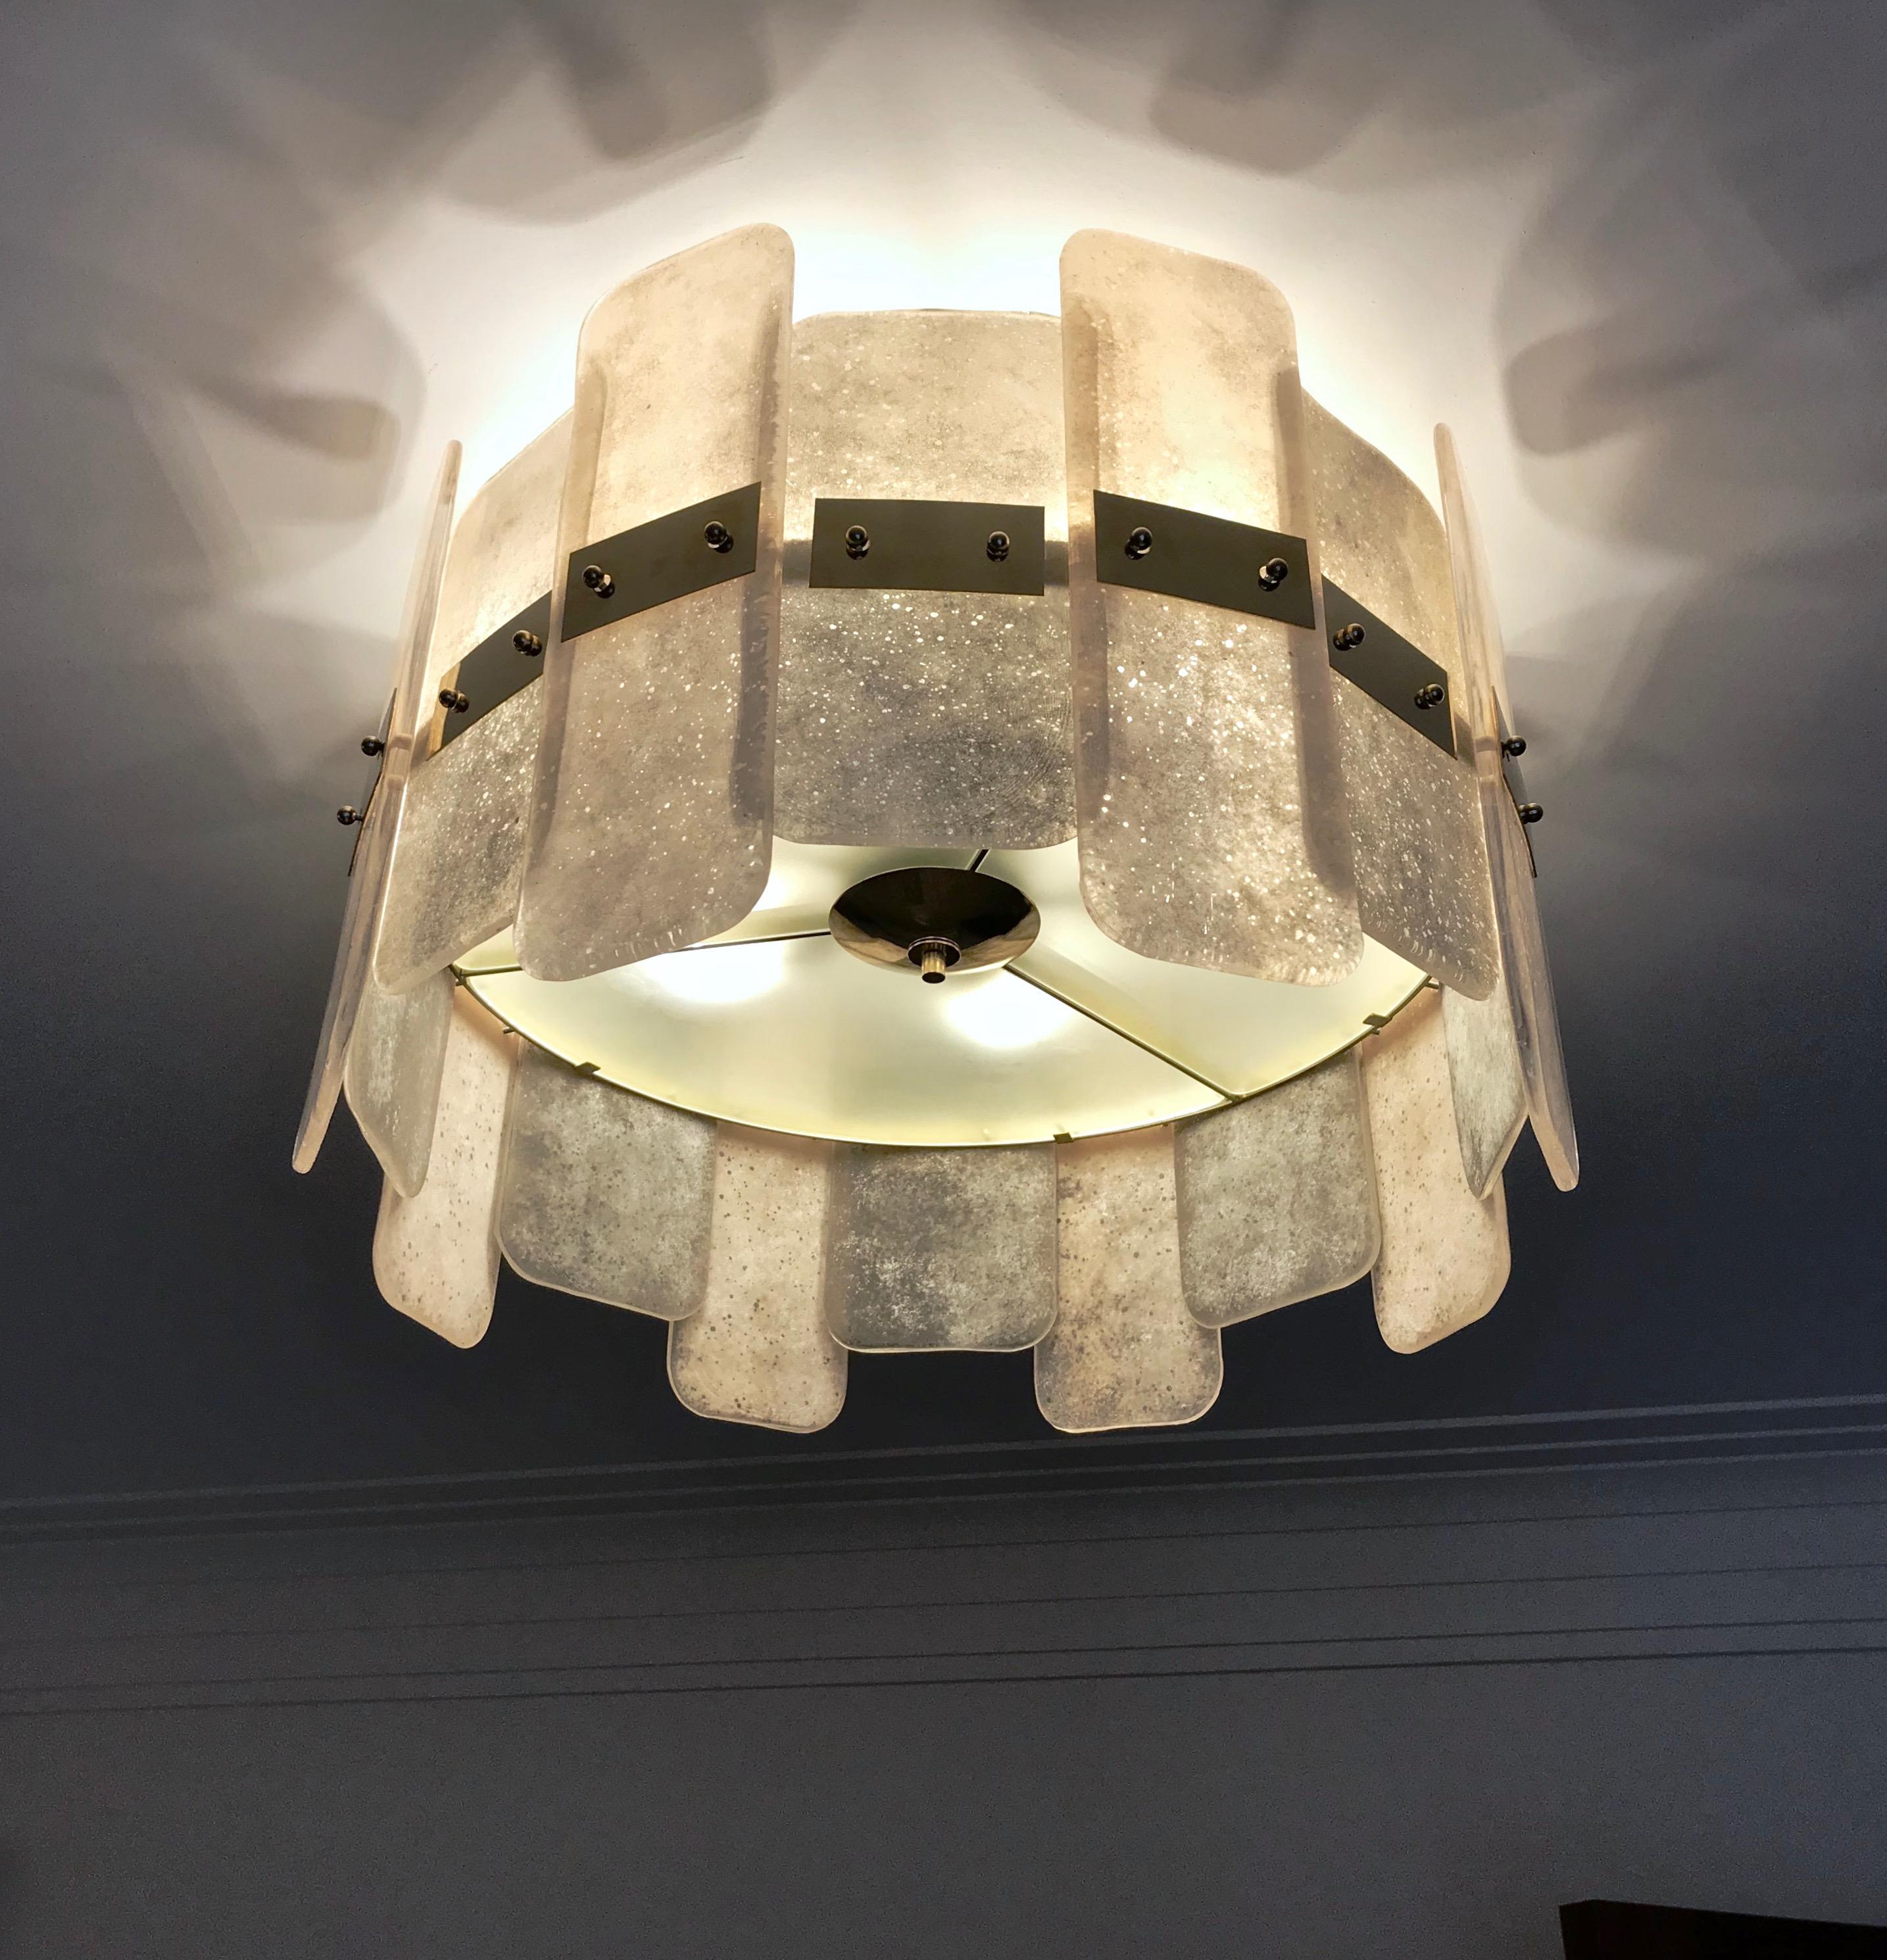 A contemporary Italian bespoke modern chandelier with Art Deco Design, entirely handcrafted in Italy, customizable as flushmounts or pendants with different glass colors and finishes, here with a brass structure in a geometric circular shape, with a